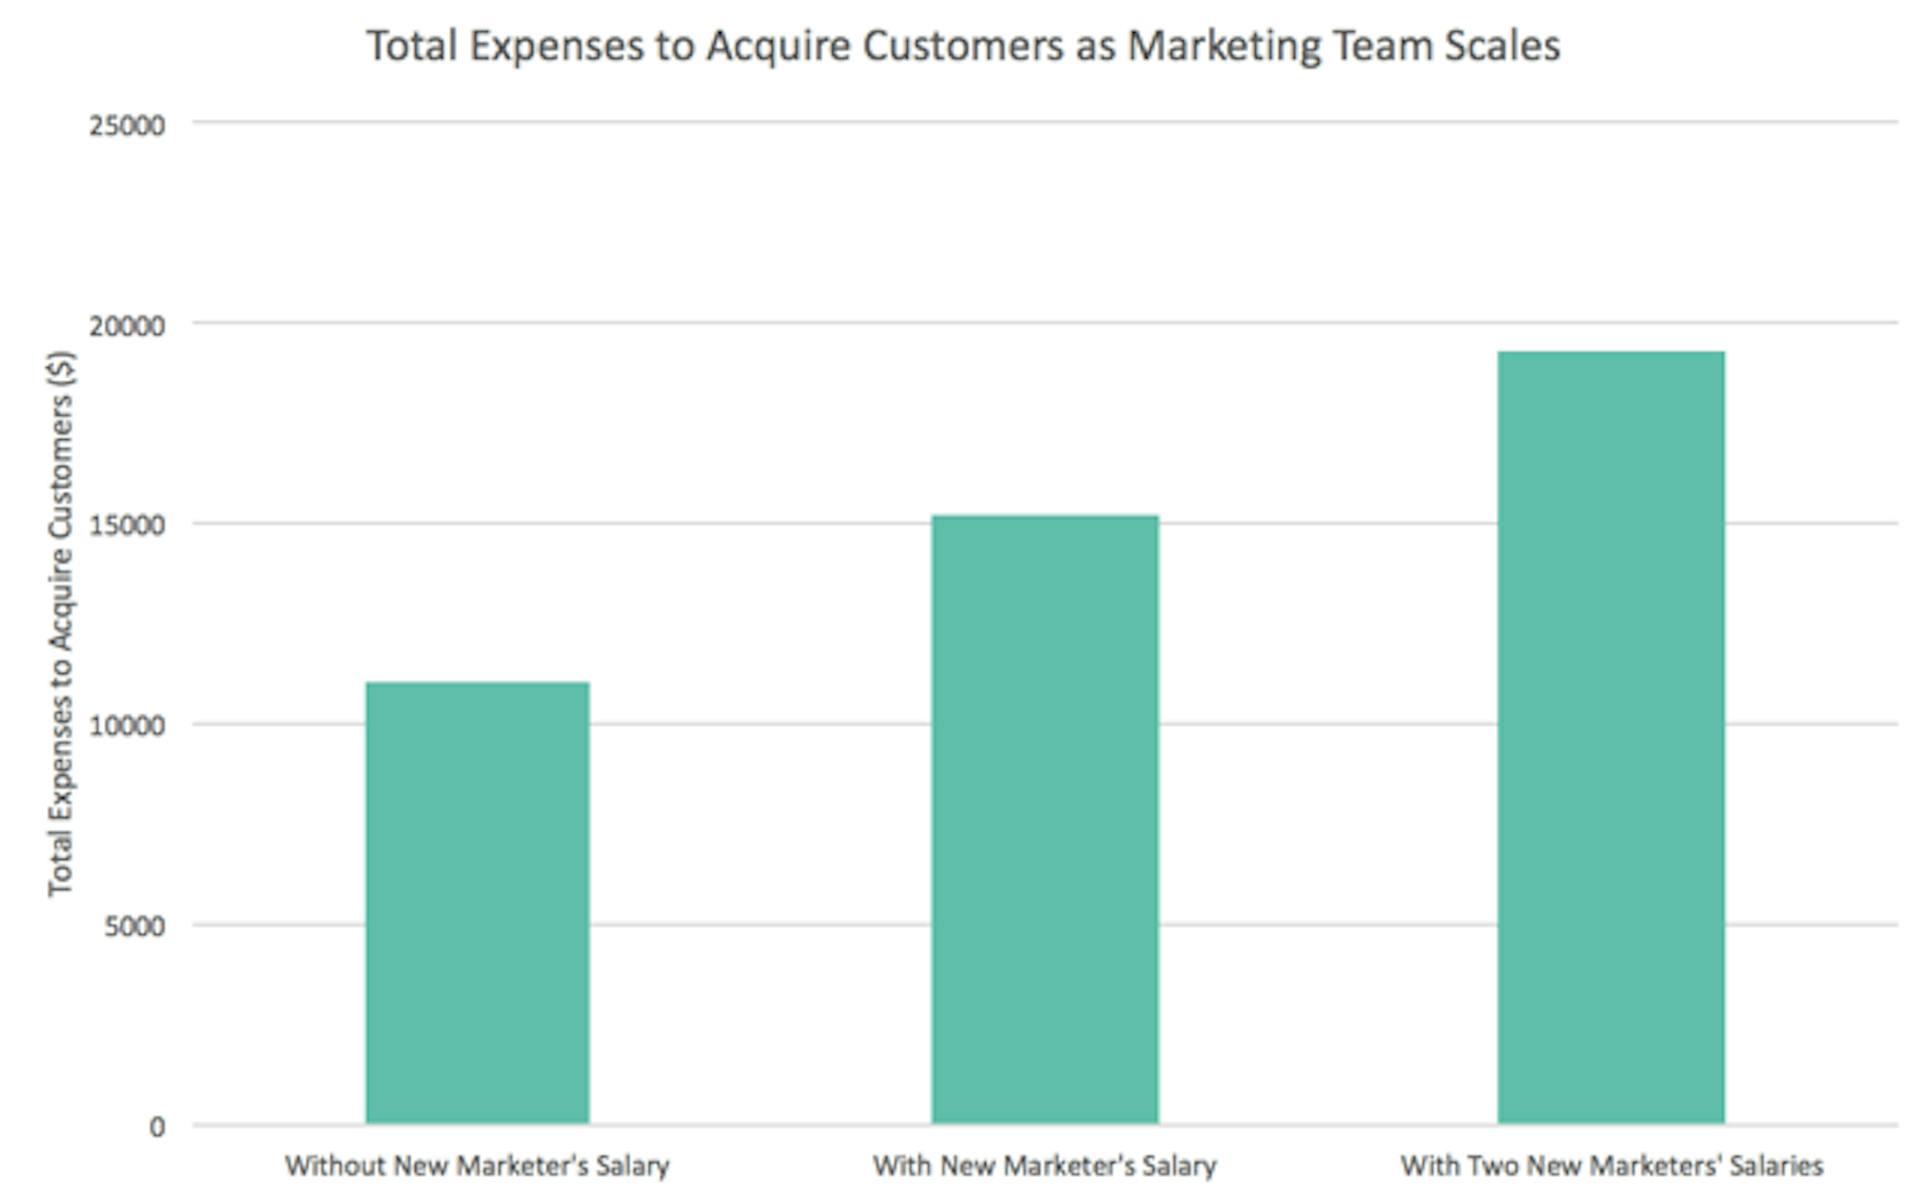 Total Expenses to Acquire Customers as Marketing Team Scales graph